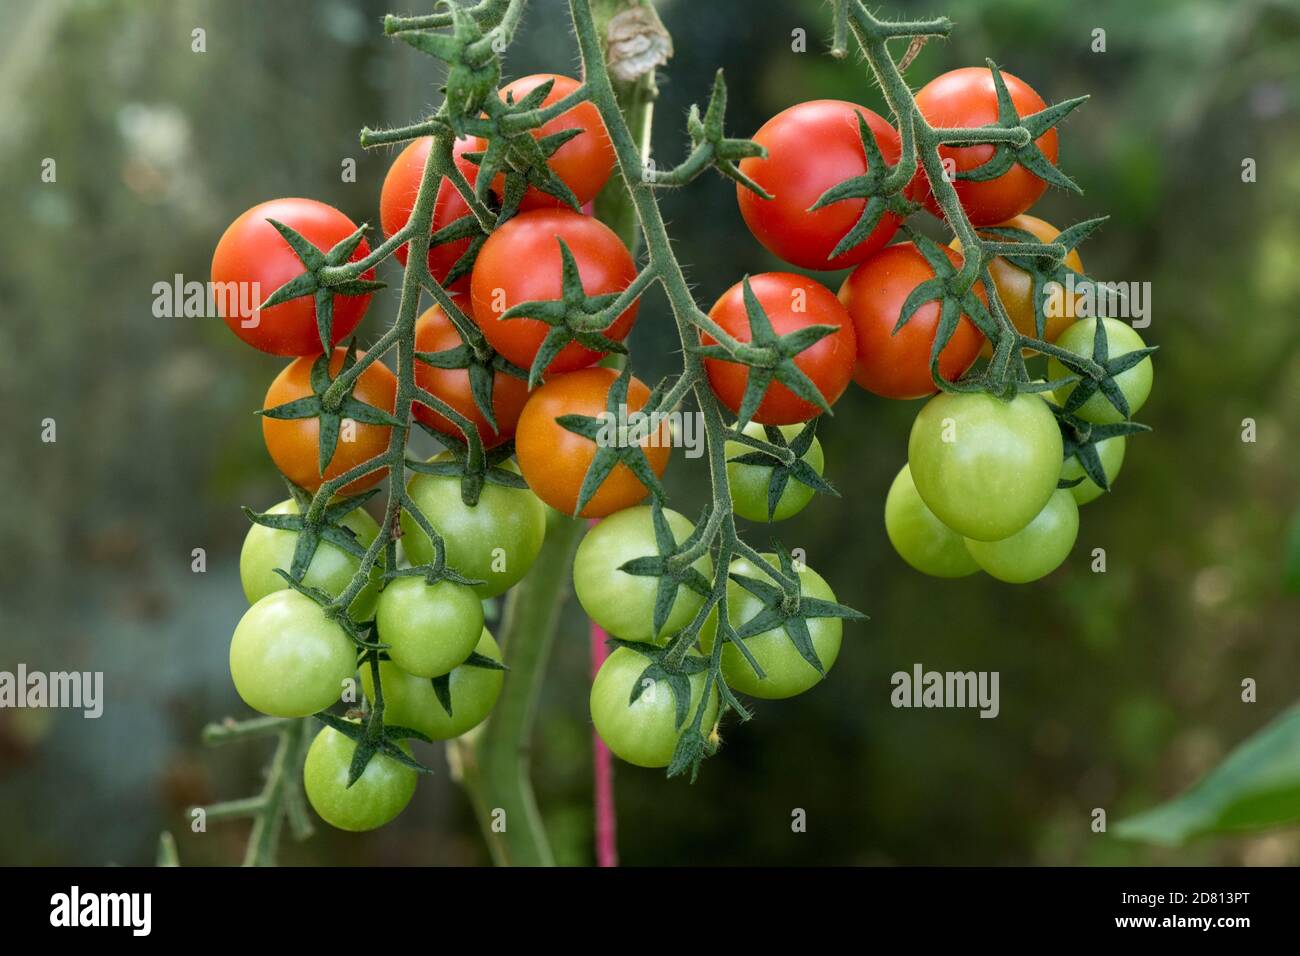 Glasshouse grown cherry tomatoes variety 'Sweet Million' green and red ripening fruit on multiple trusses, Berkshire, August Stock Photo